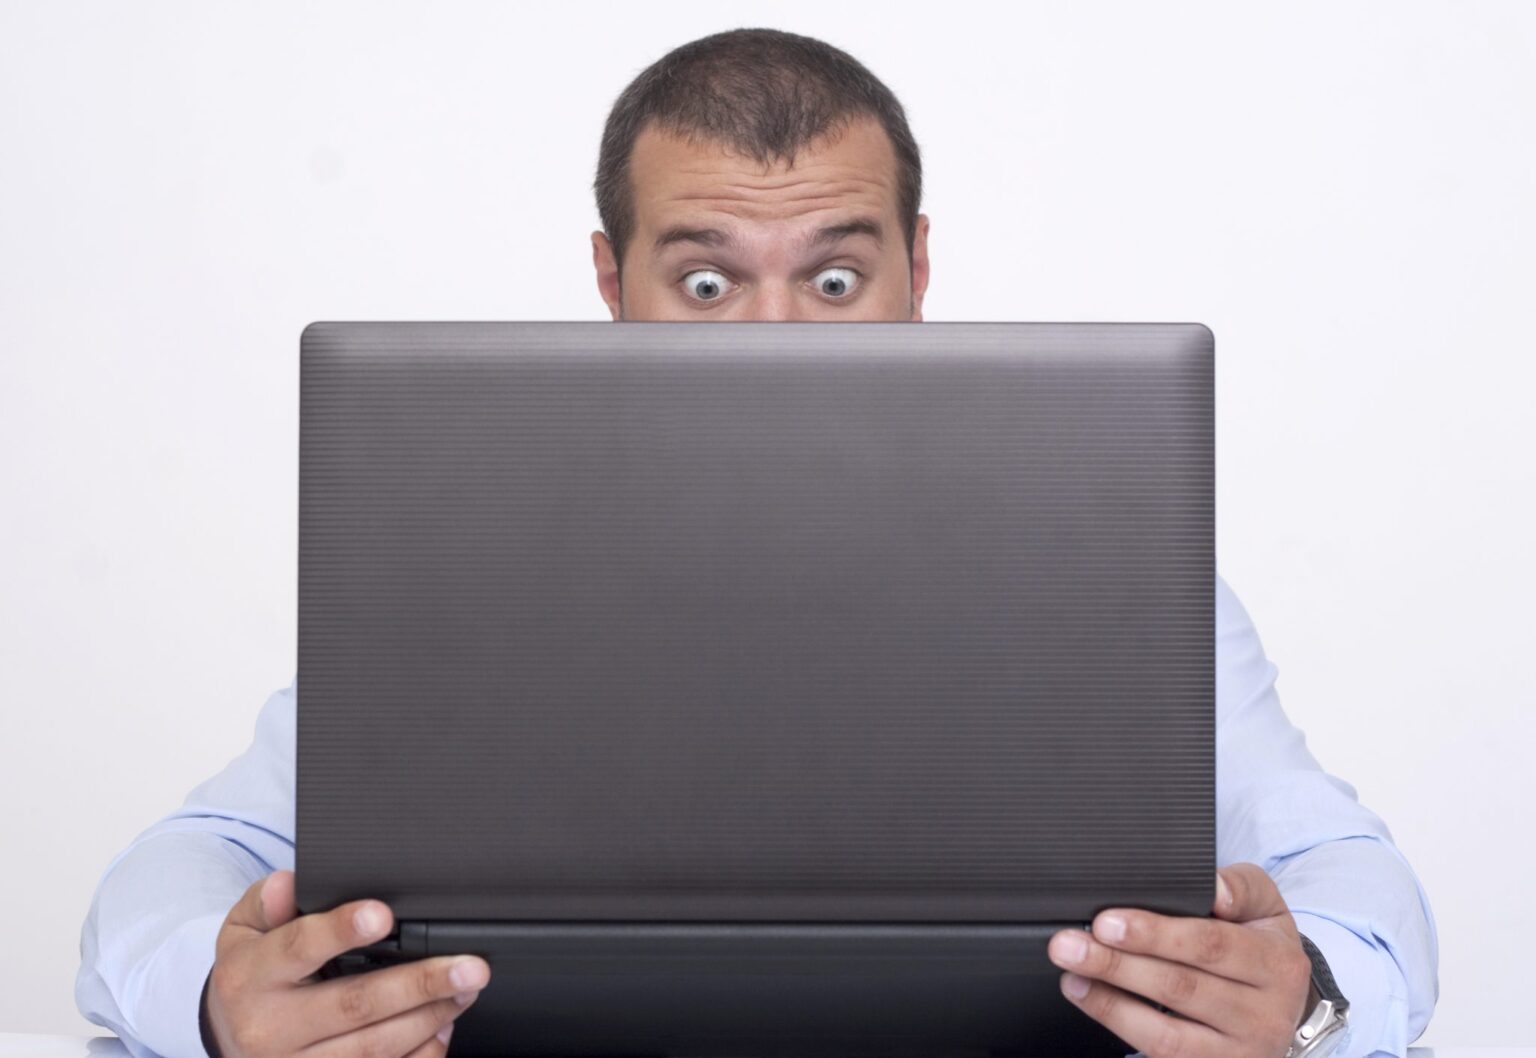 A man expressing surprise with a laptop computer